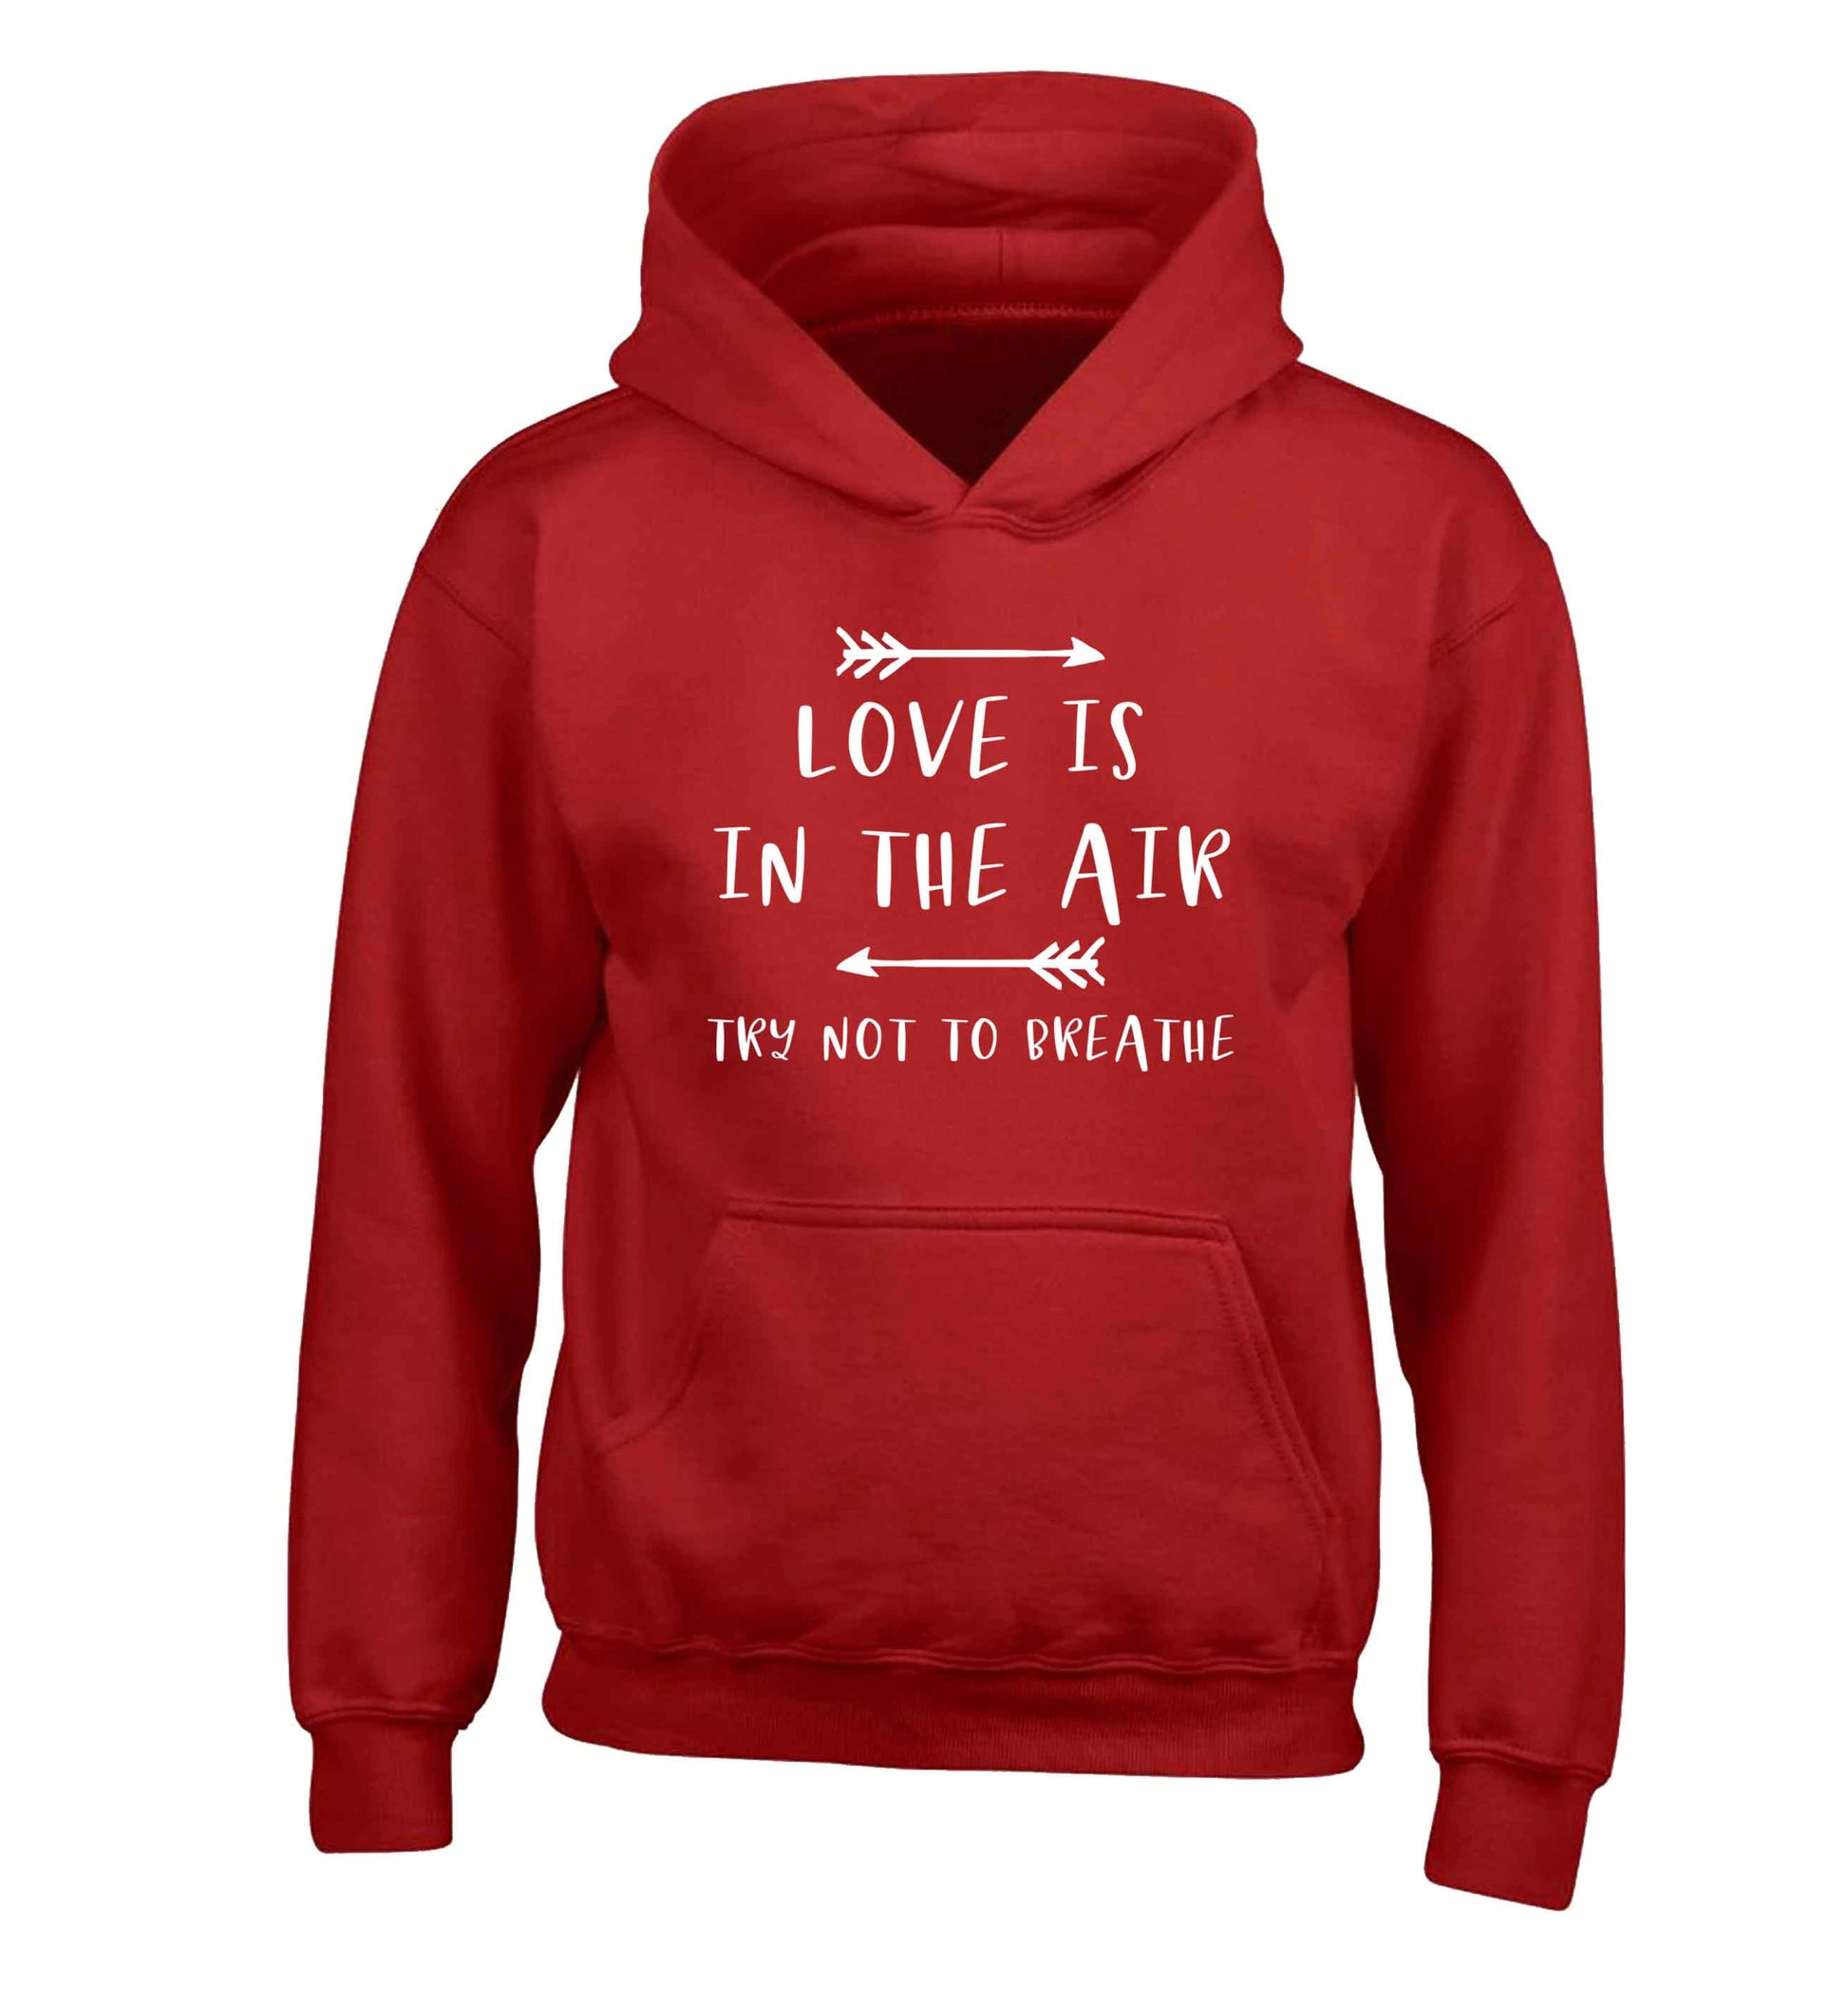 Love is in the air try not to breathe children's red hoodie 12-13 Years